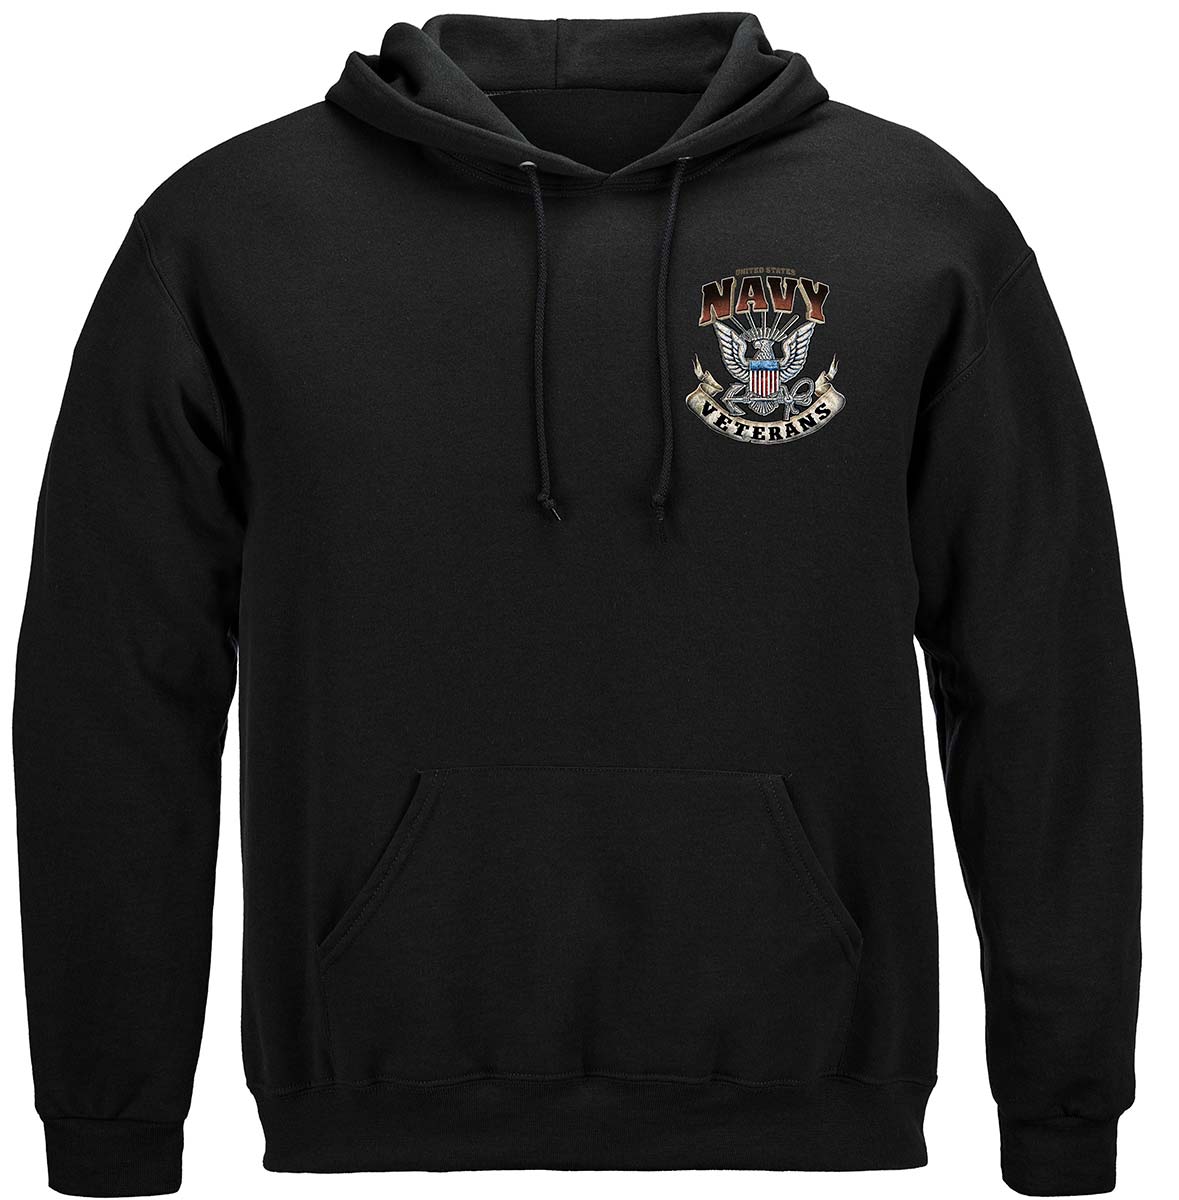 Navy Proud To Have Served Premium Hooded Sweat Shirt